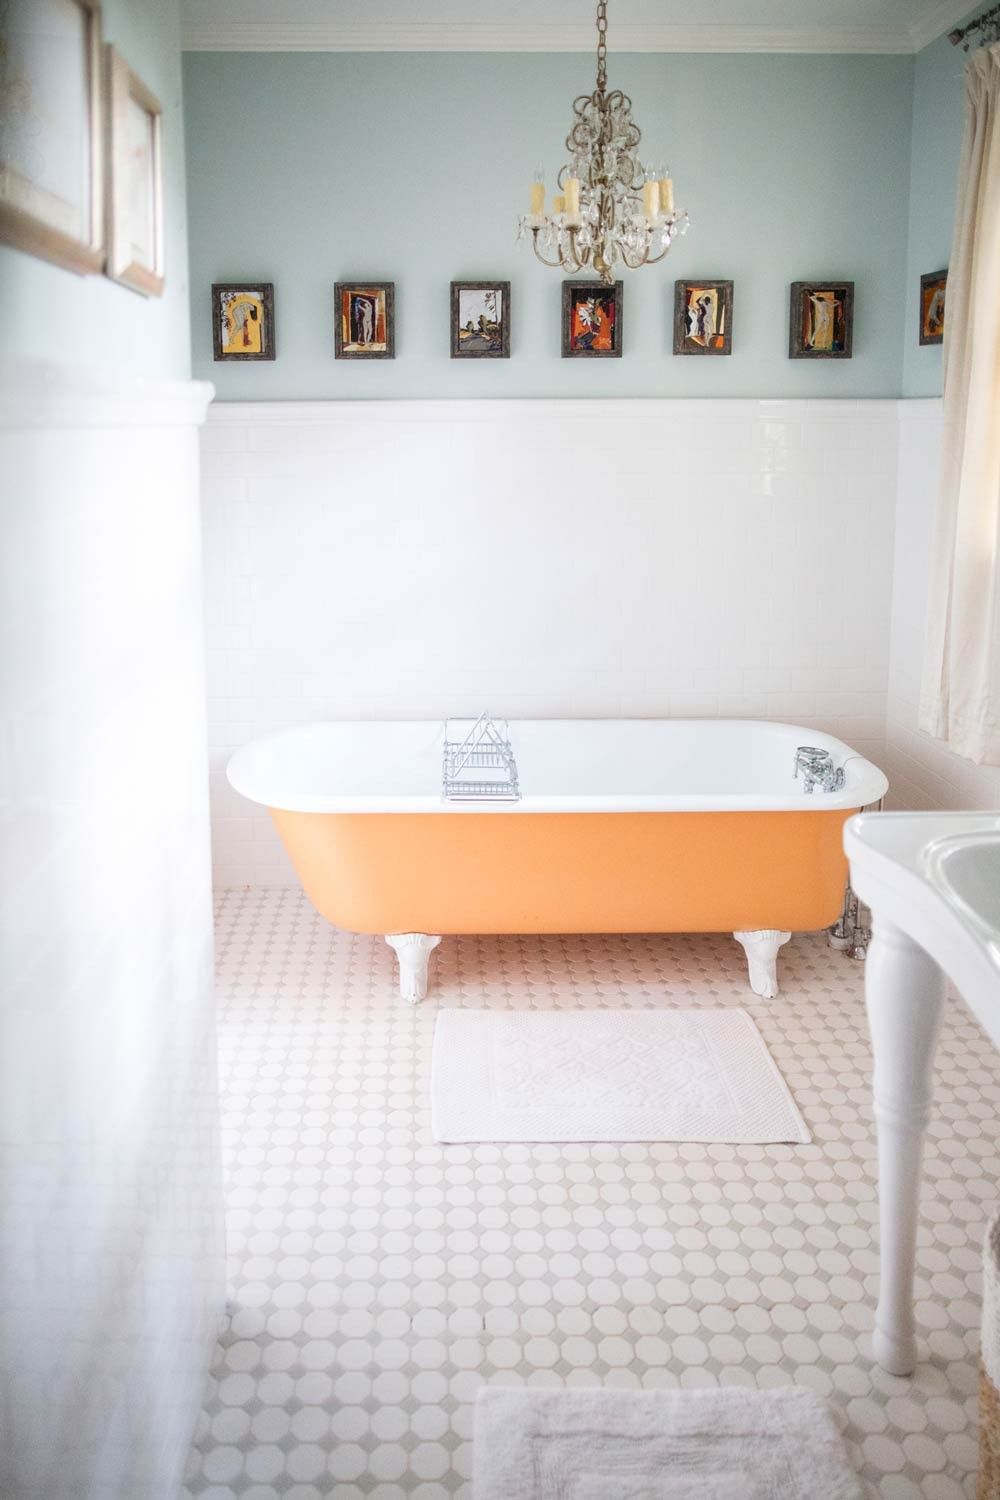 Make the family bathroom more vibrant with the highlight of a colorful bathtub - Photo 7.